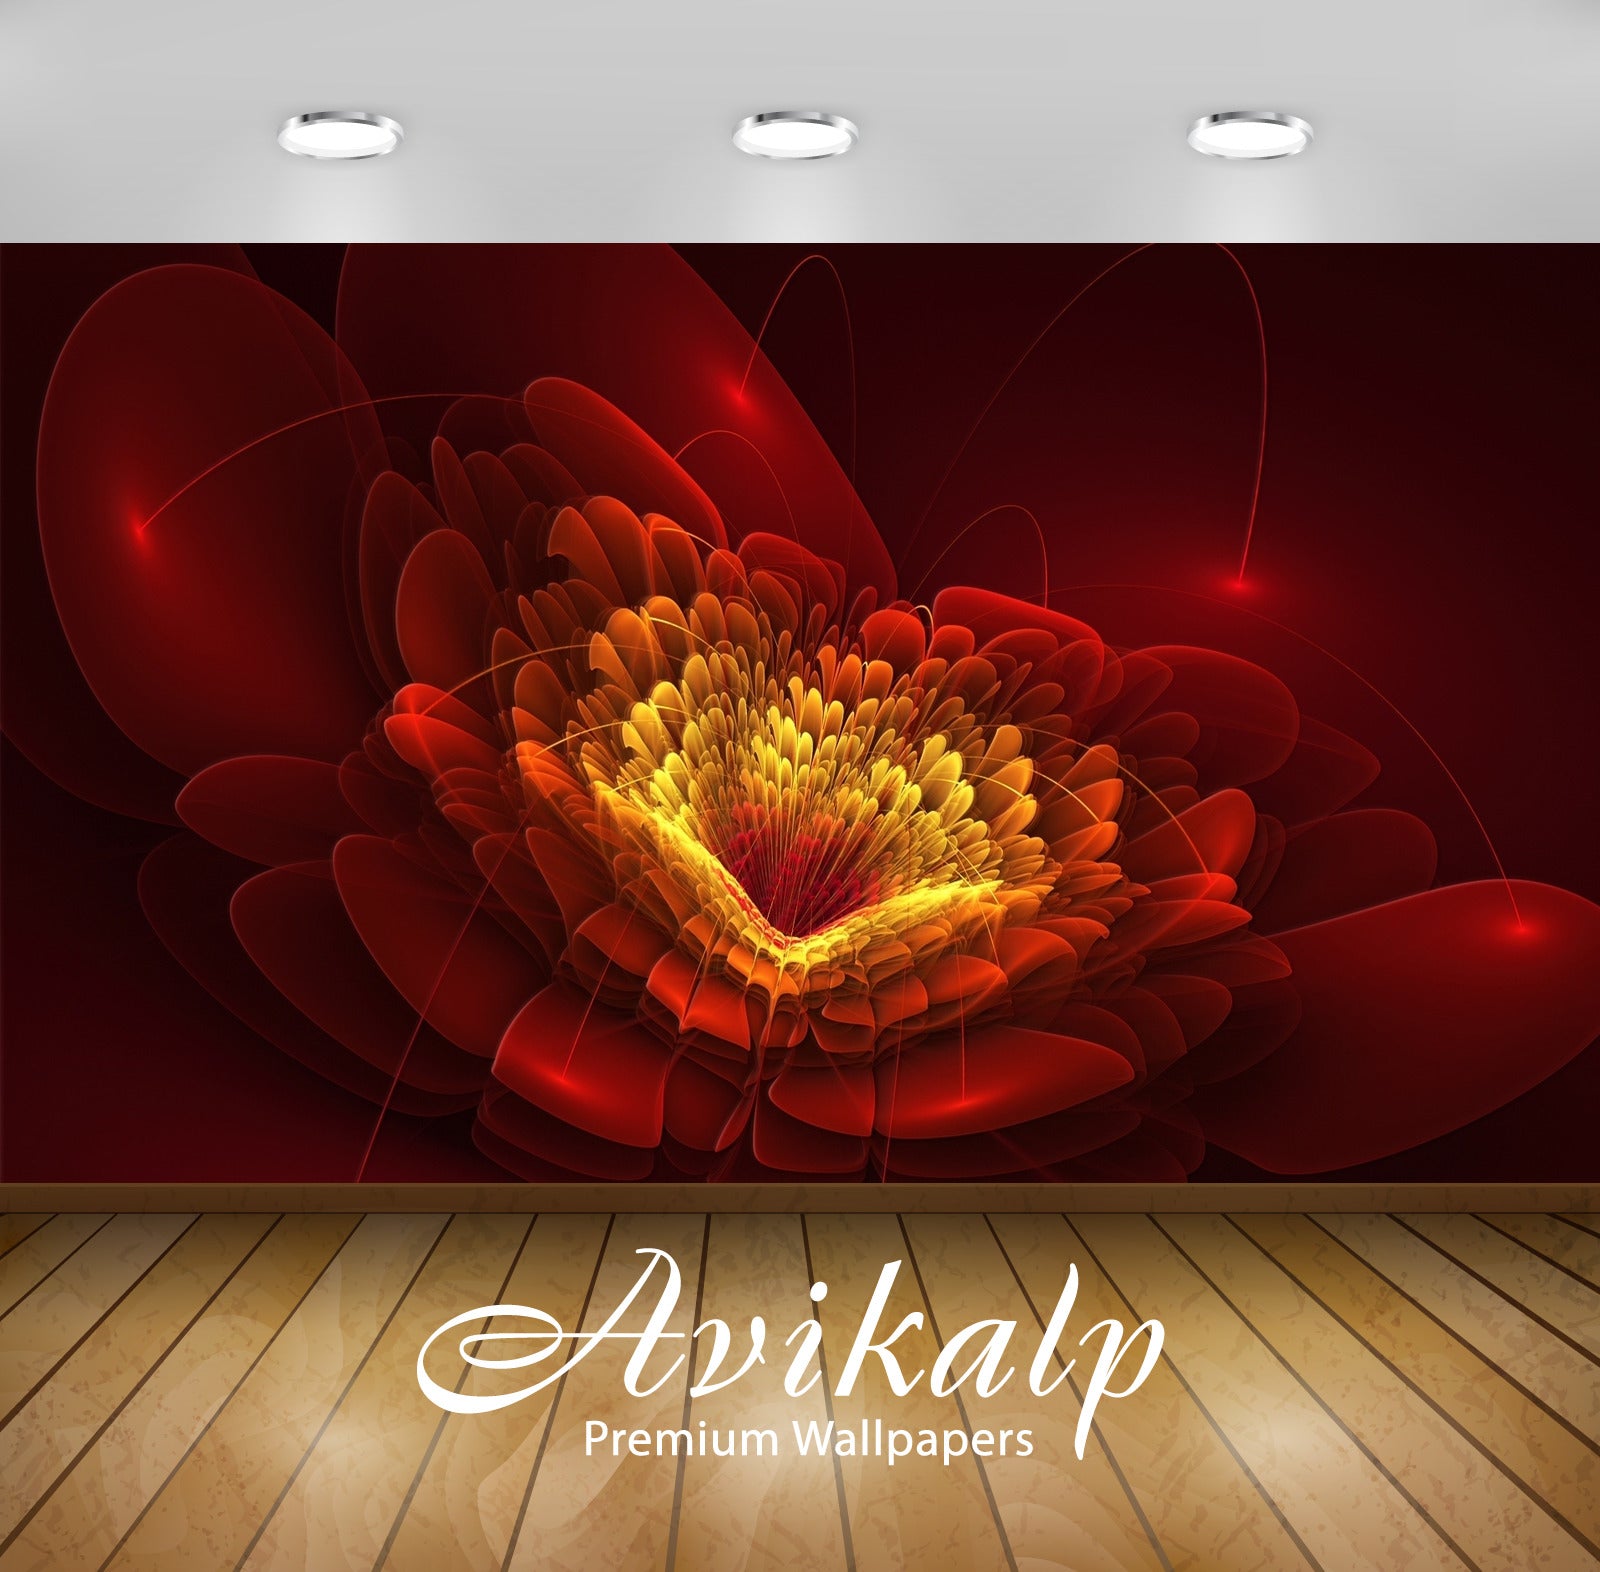 Avikalp Exclusive Awi4441 Golden Core Of The Red Flower Full HD Wallpapers for Living room, Hall, Ki